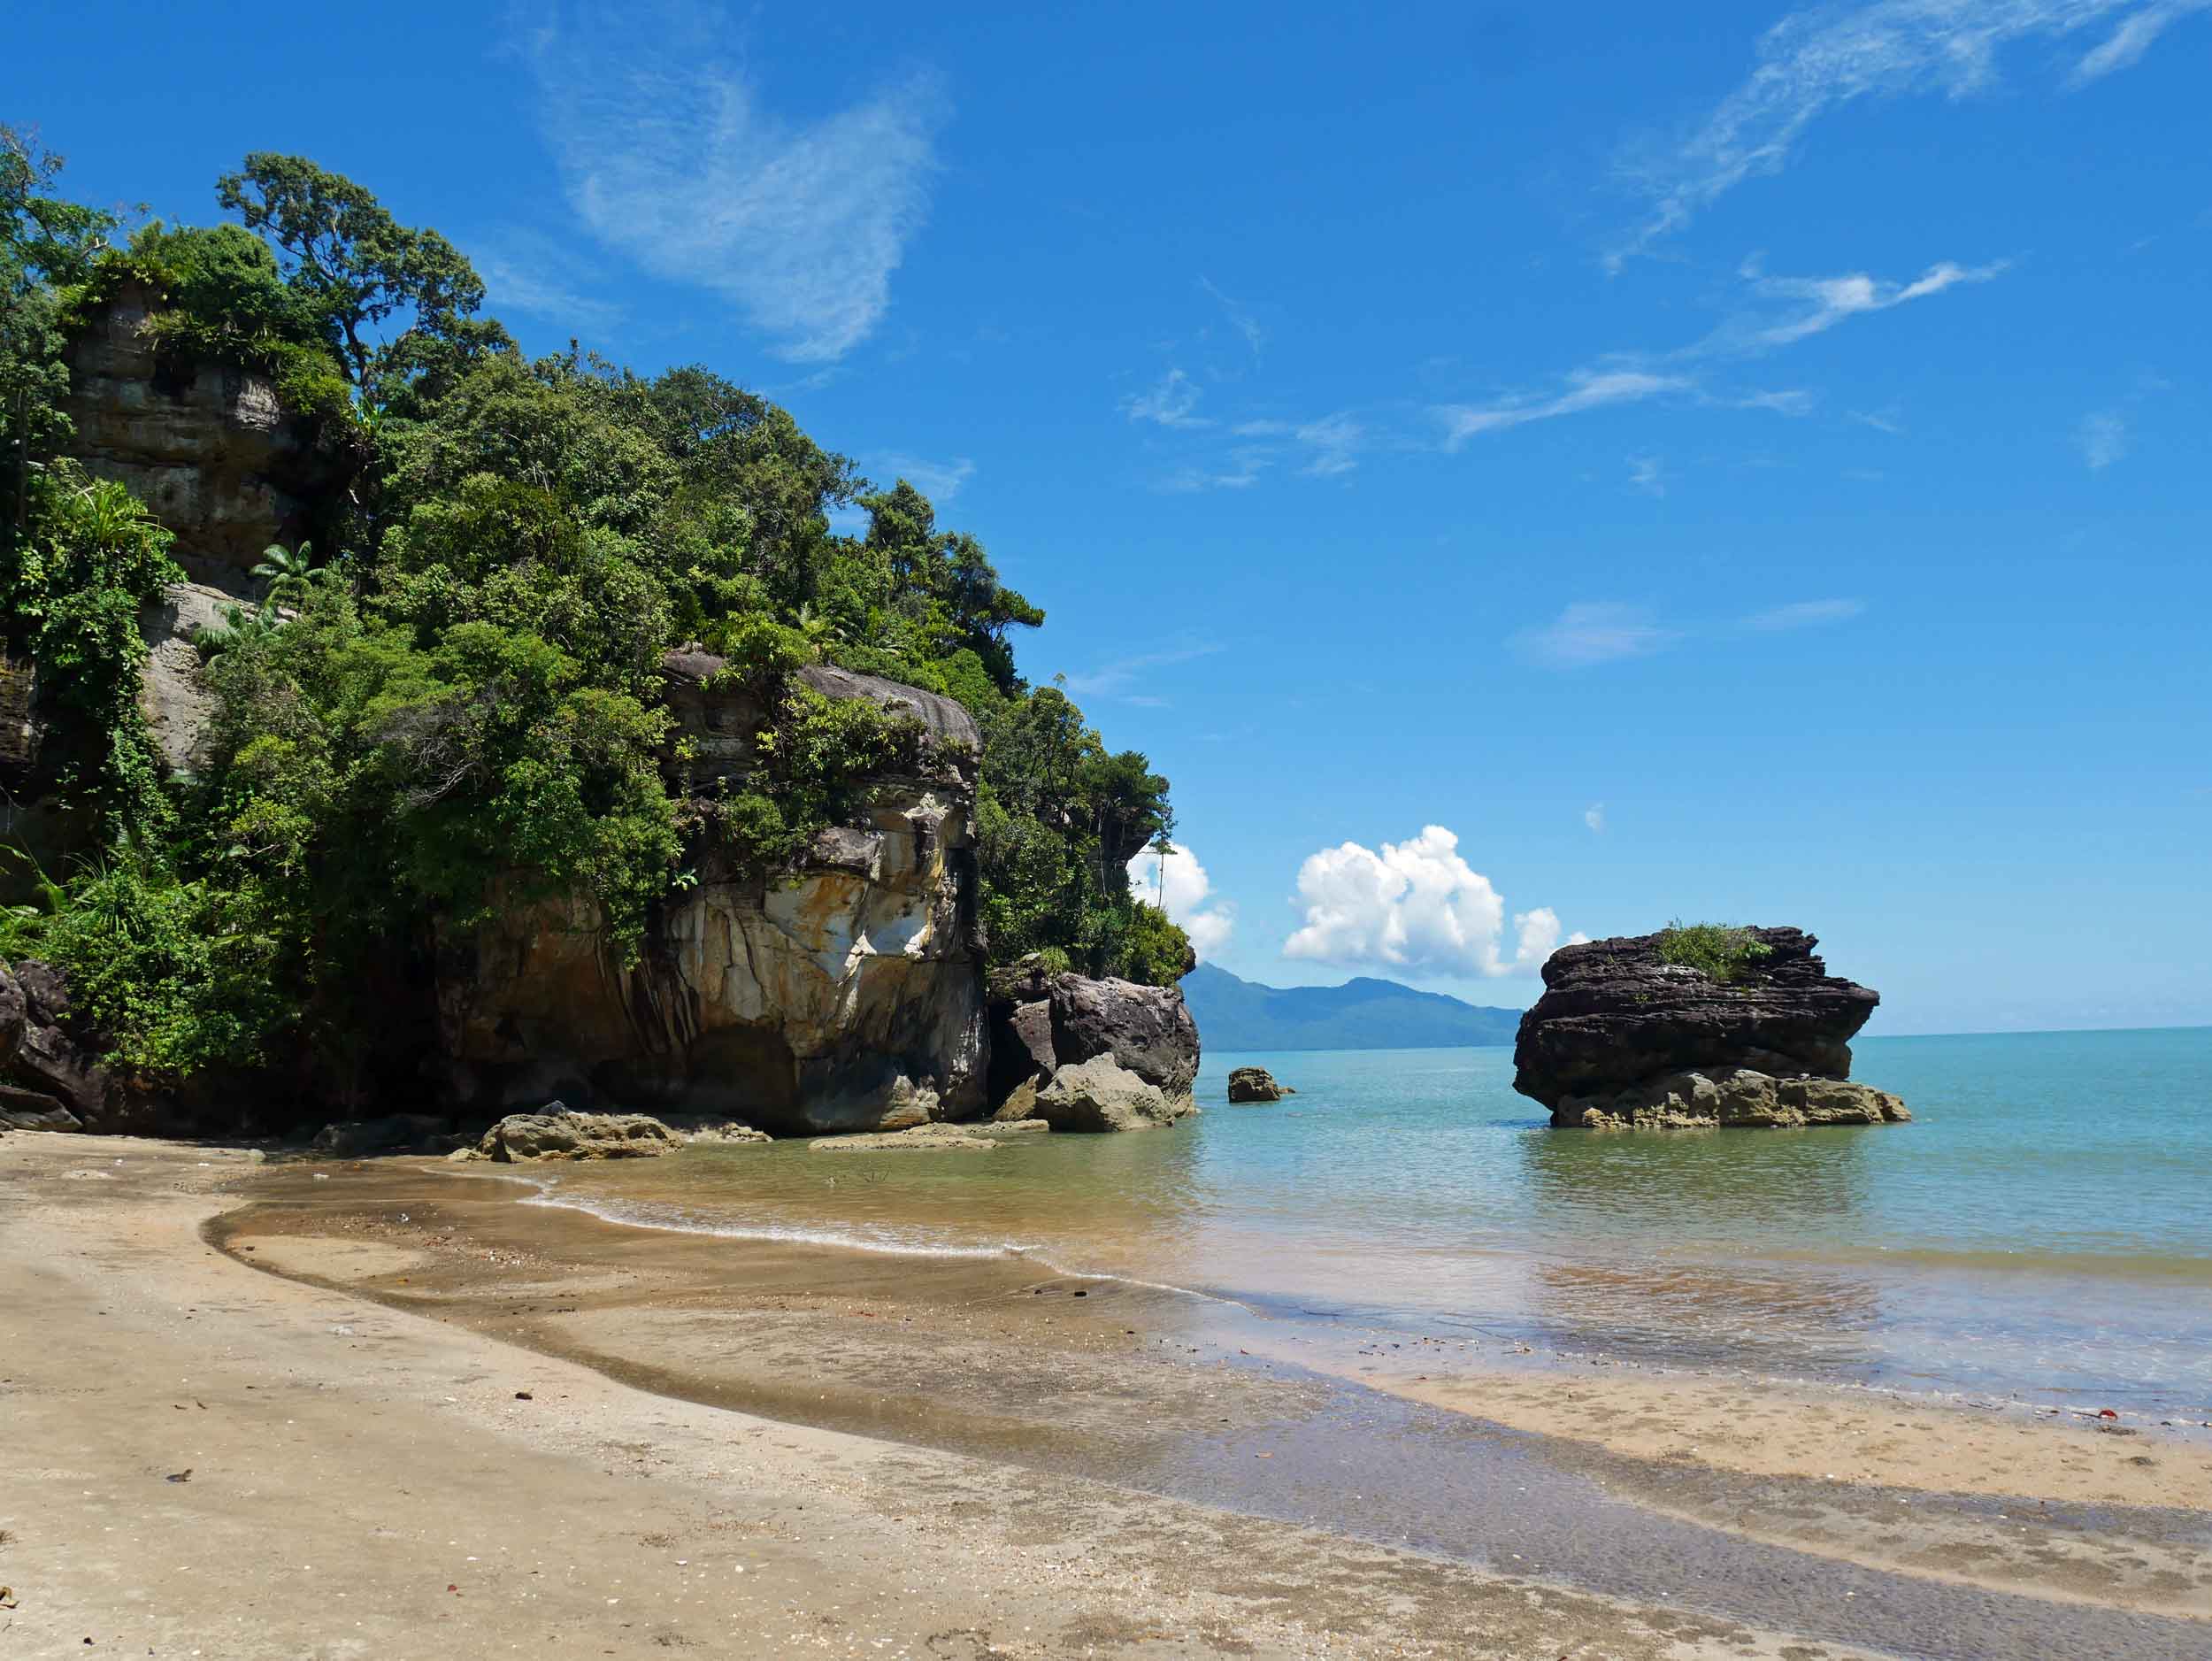  The trail ends at beautiful white sand beach with big rock formations carved by the sea.&nbsp; 